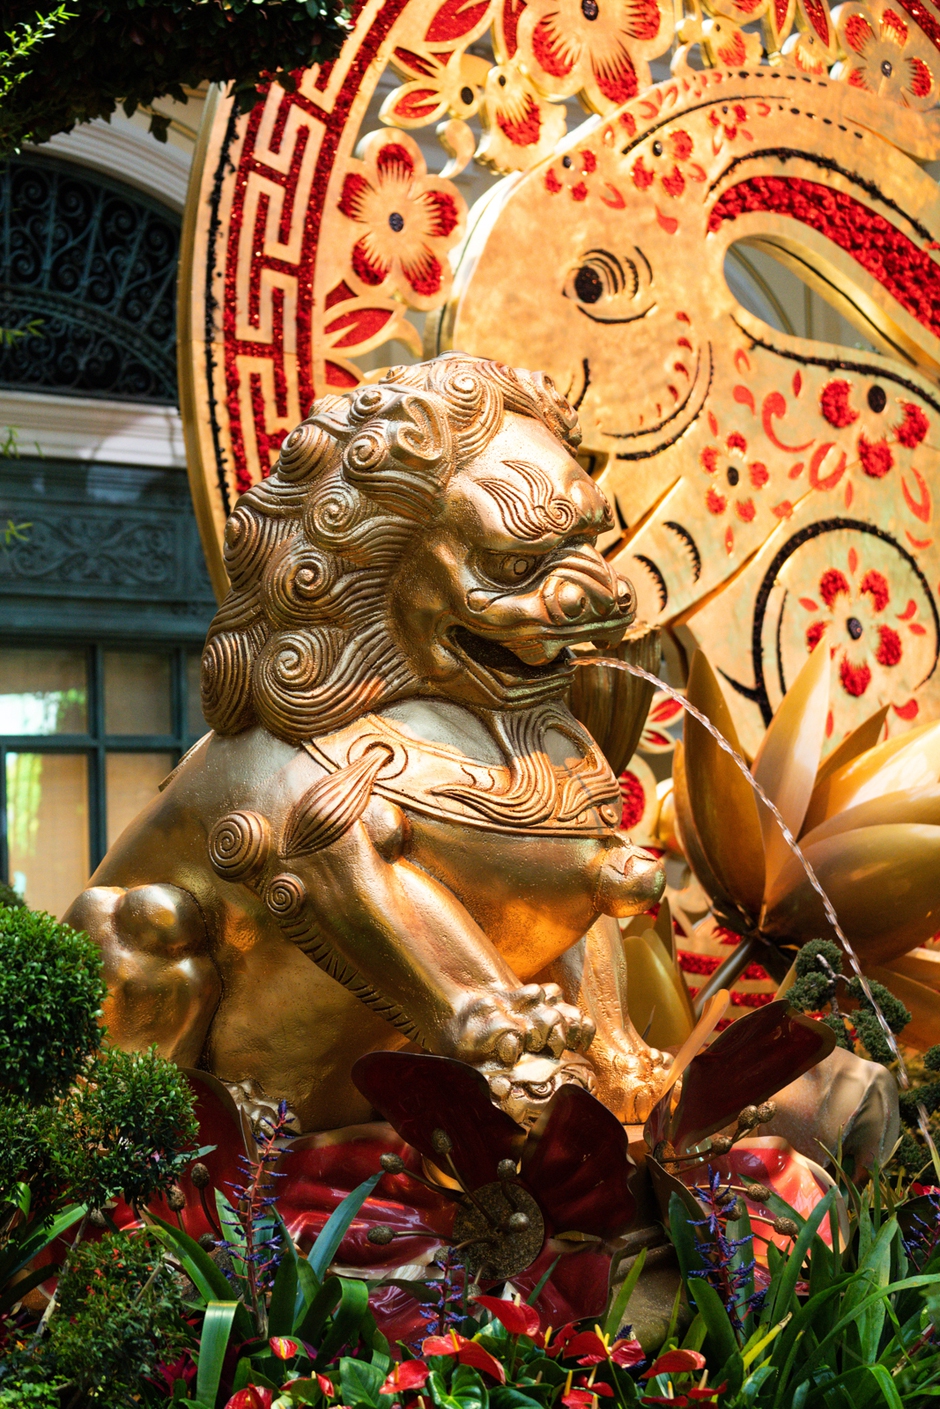 Bellagio Conservatory Chinese New Year 2021 “Year of the Ox” Display PHOTOS  - VegasChanges